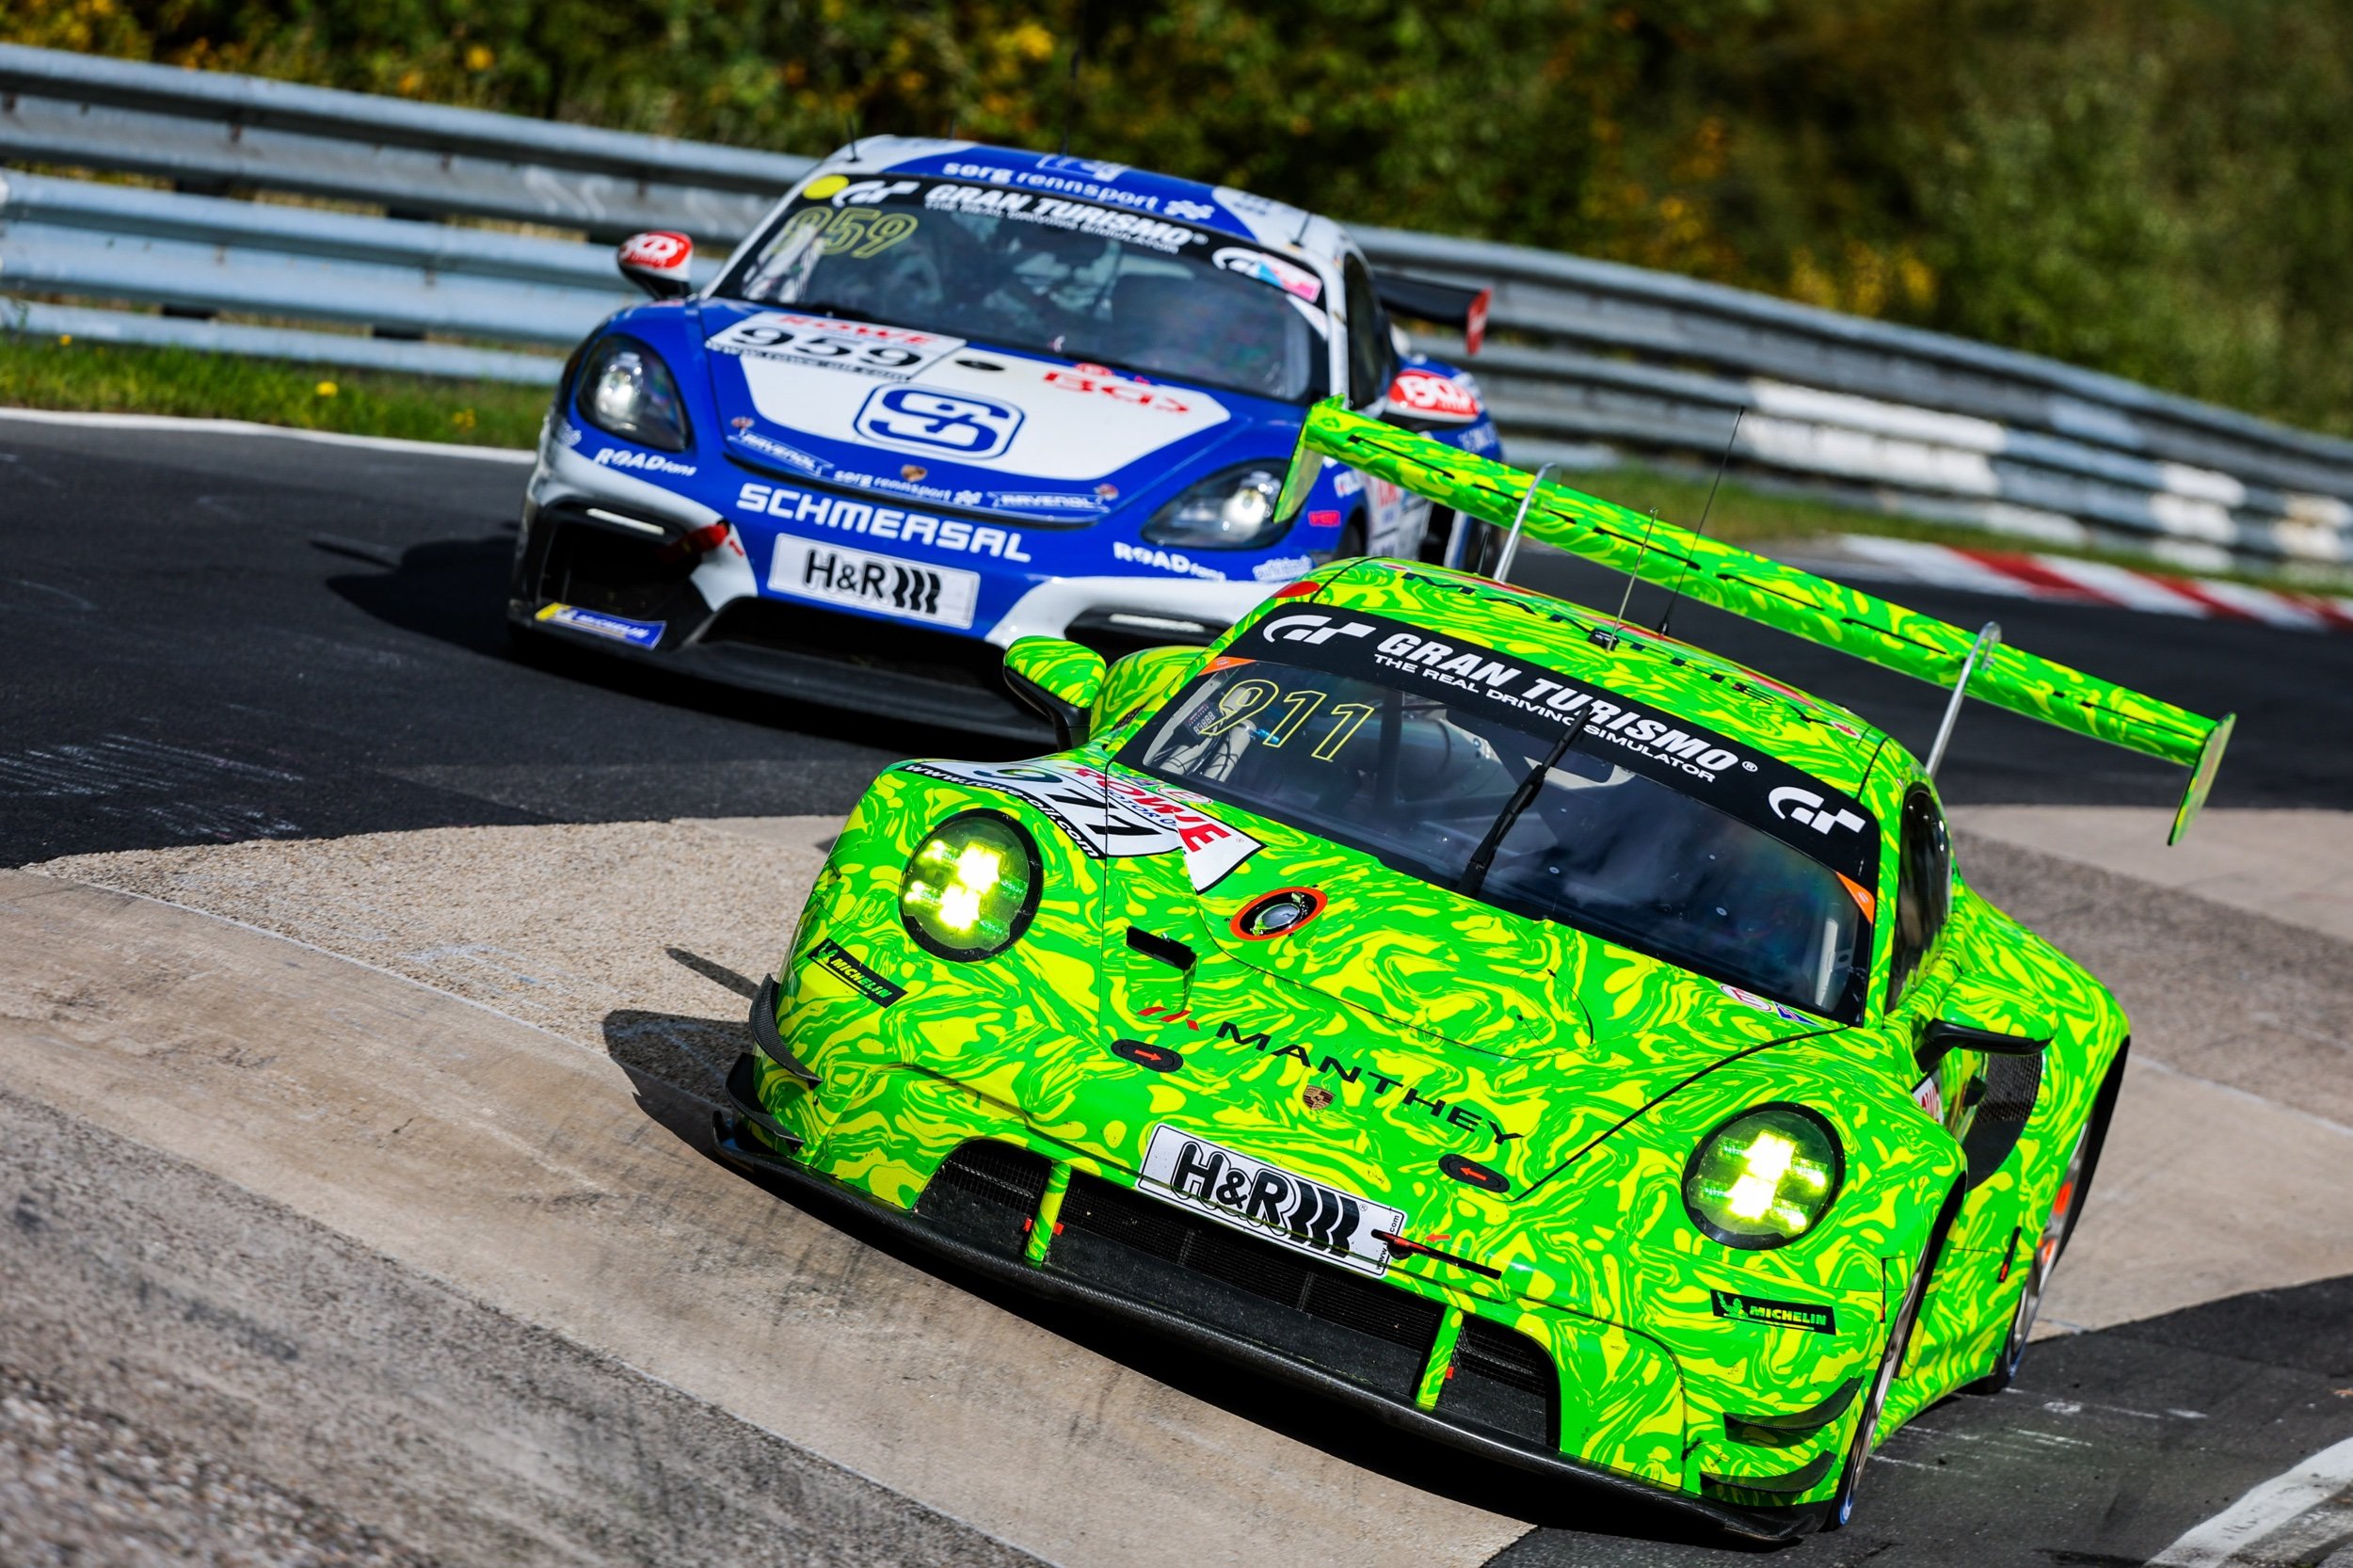 Debut for the newest generation of the Porsche 911 GT3 R - Porsche Newsroom